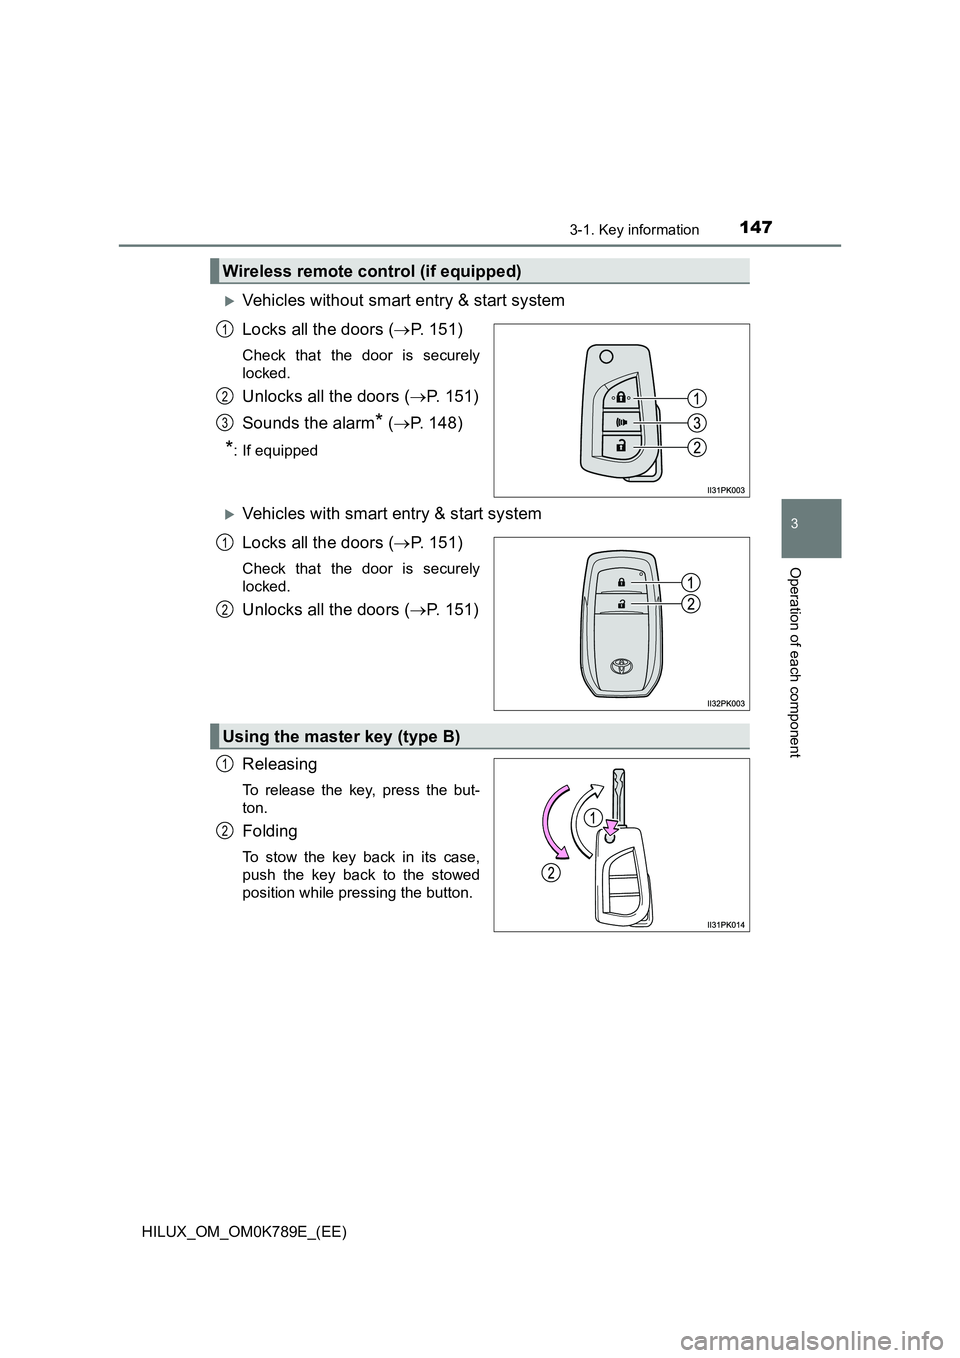 TOYOTA HILUX 2023  Owners Manual 1473-1. Key information
3
Operation of each component
HILUX_OM_OM0K789E_(EE)
Vehicles without smart entry & start system 
Locks all the doors ( P. 151)
Check that the door is securely 
locked.
U